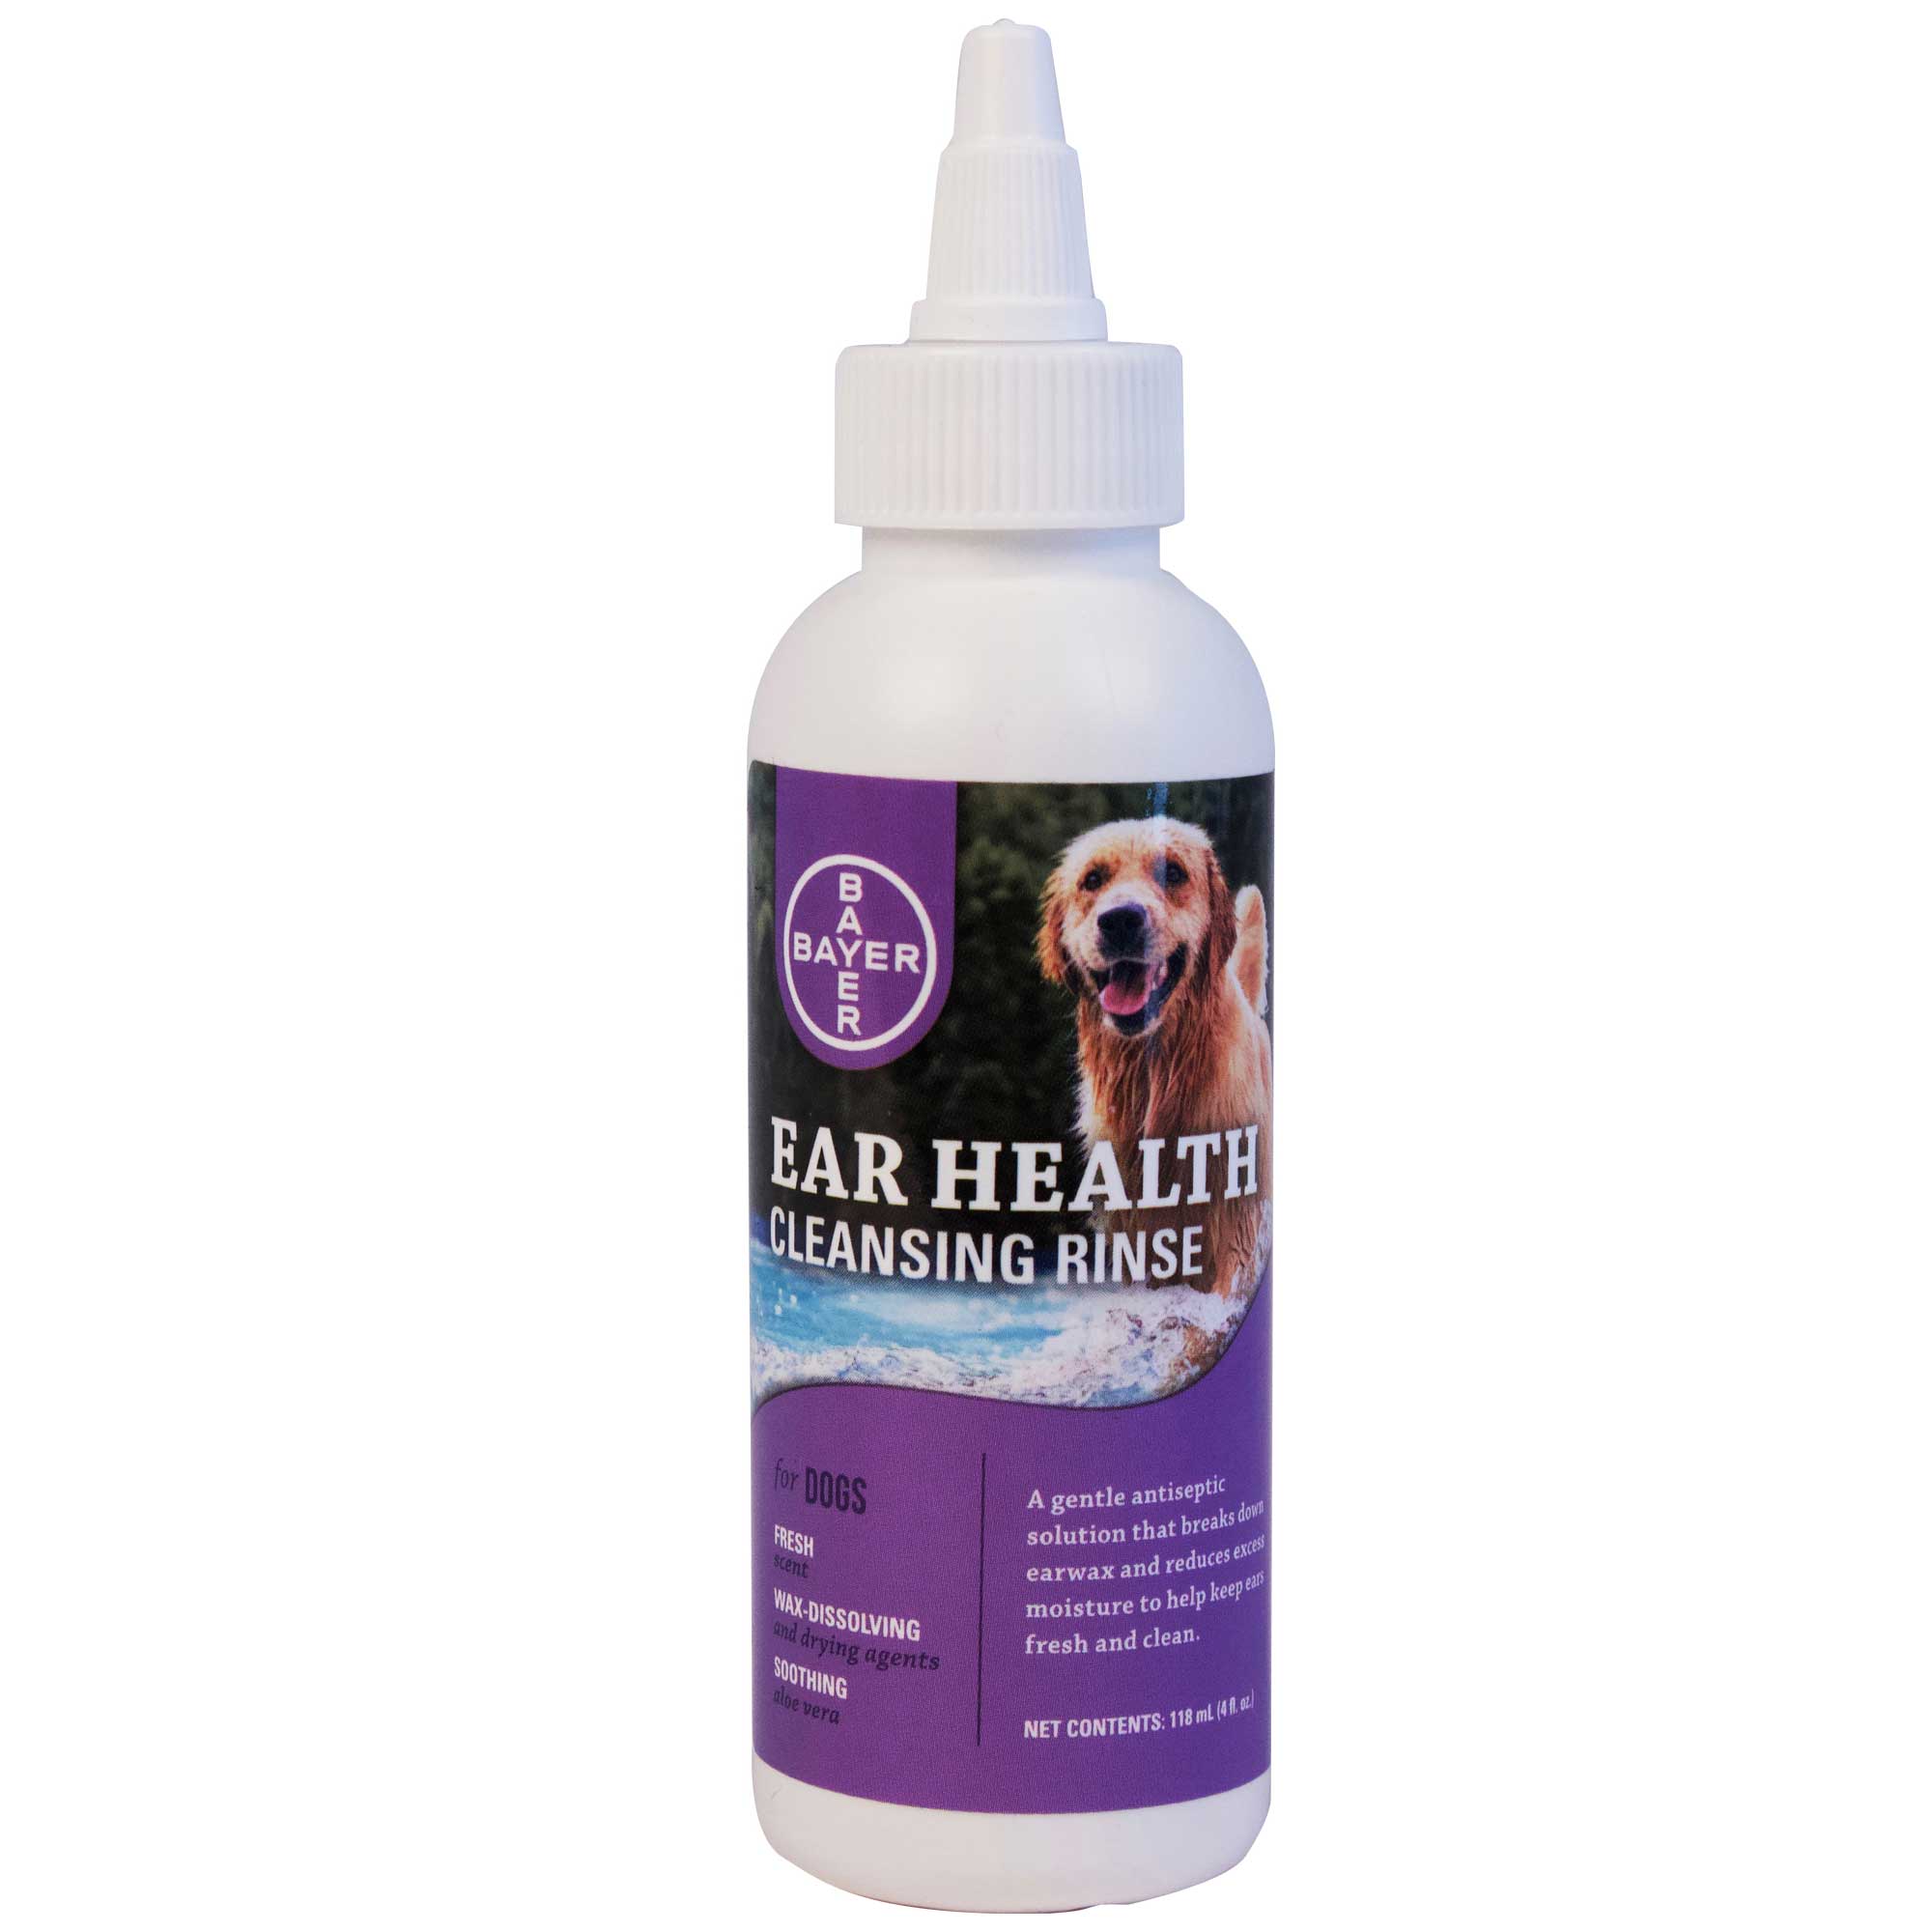 Bayer Ear Health Cleansing Rinse Usage